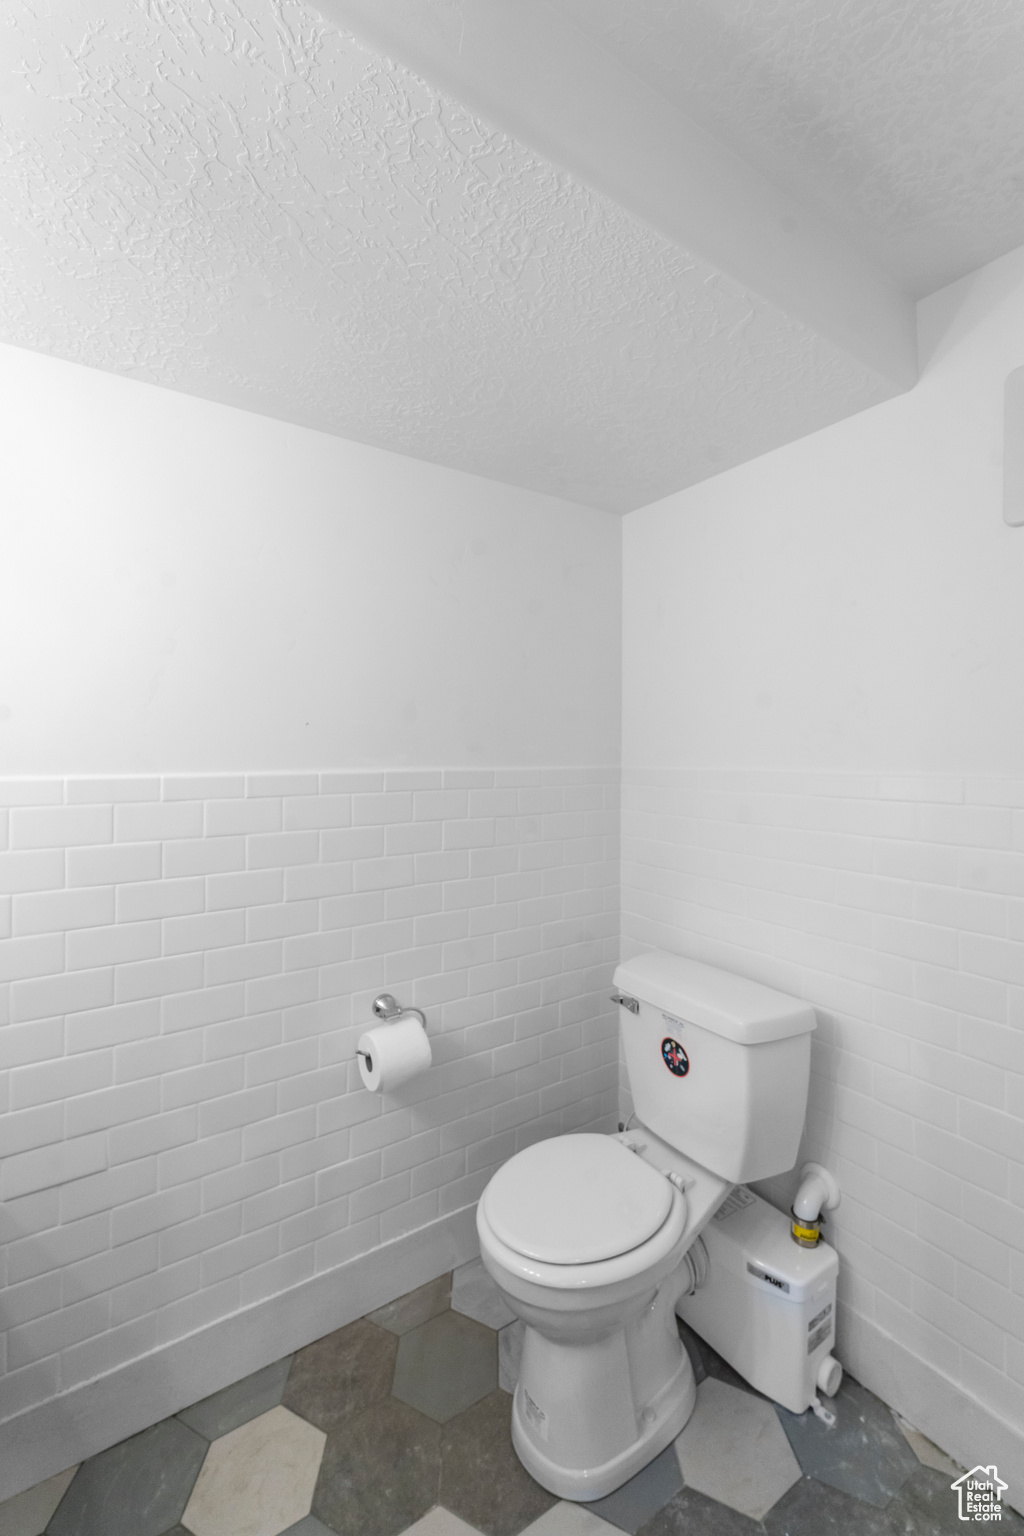 Bathroom with tile flooring, a textured ceiling, tile walls, and toilet